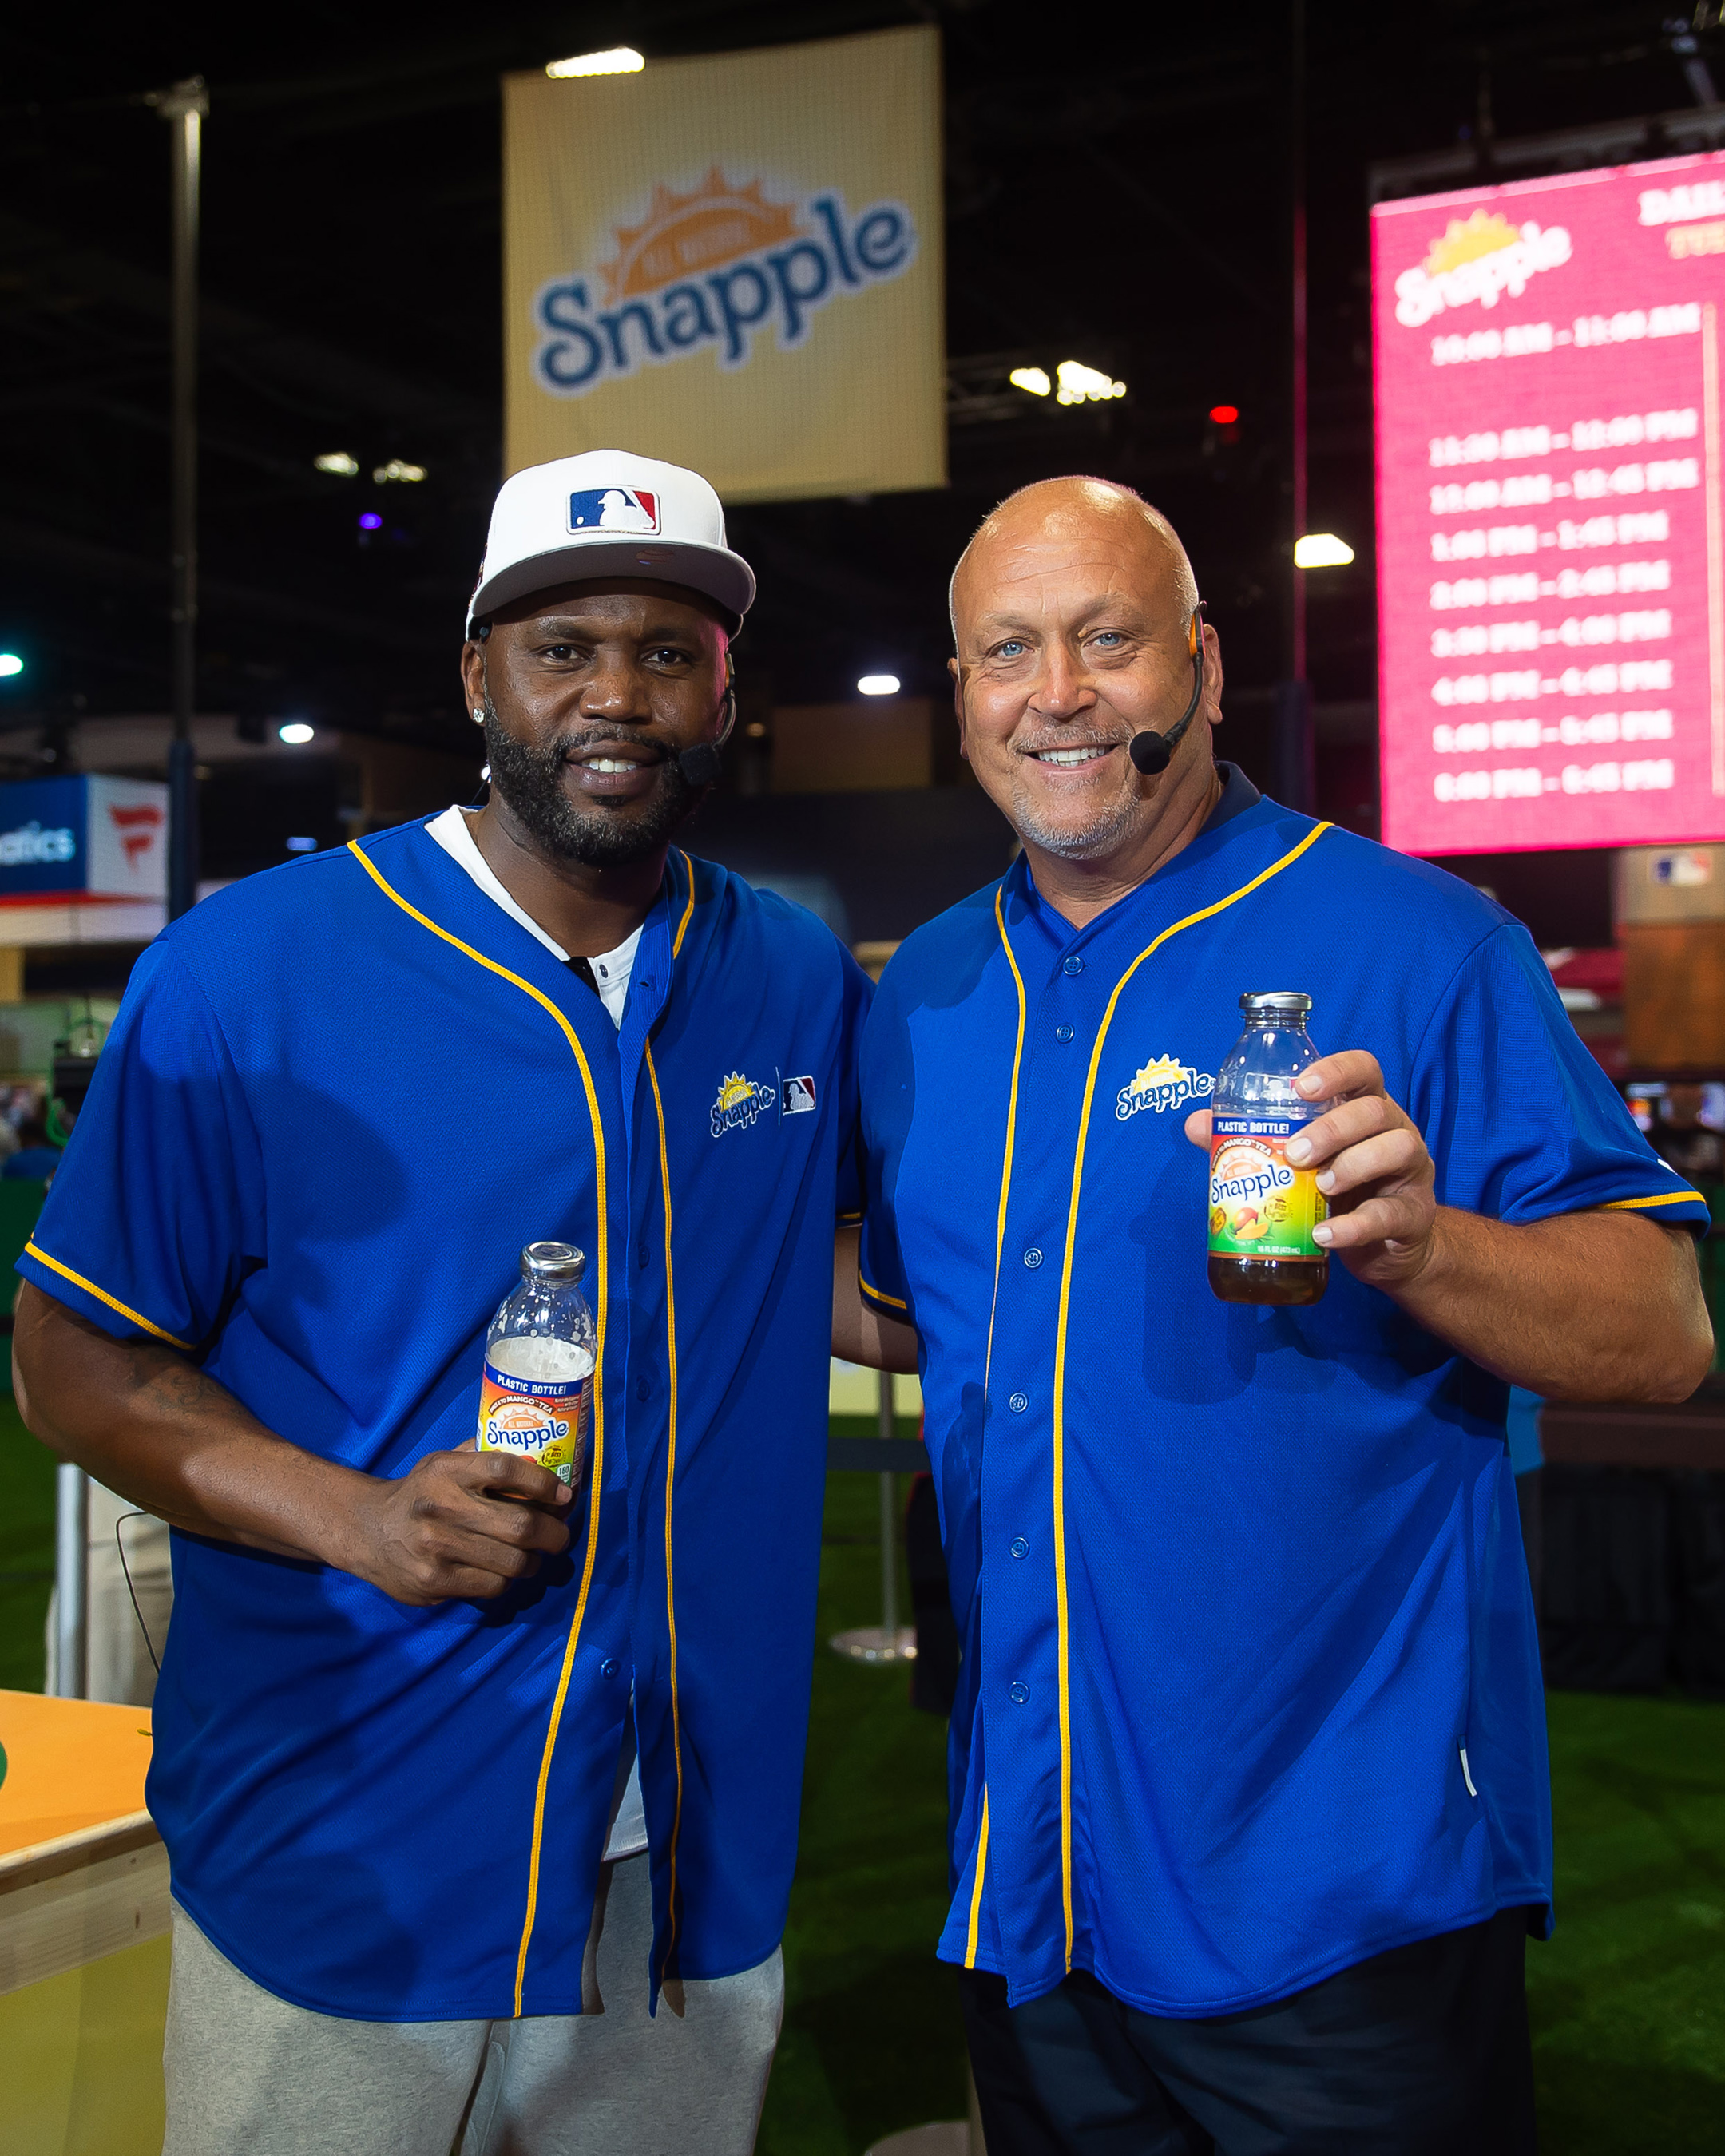 Hall of Famer Cal Ripken Jr. and World Series Champion Cliff Floyd faced off in the first-ever Snapple All-Star Bottle Flip Challenge at MLB FanFest. Cliff Floyd was crowned “Flip for Flavor” champion.